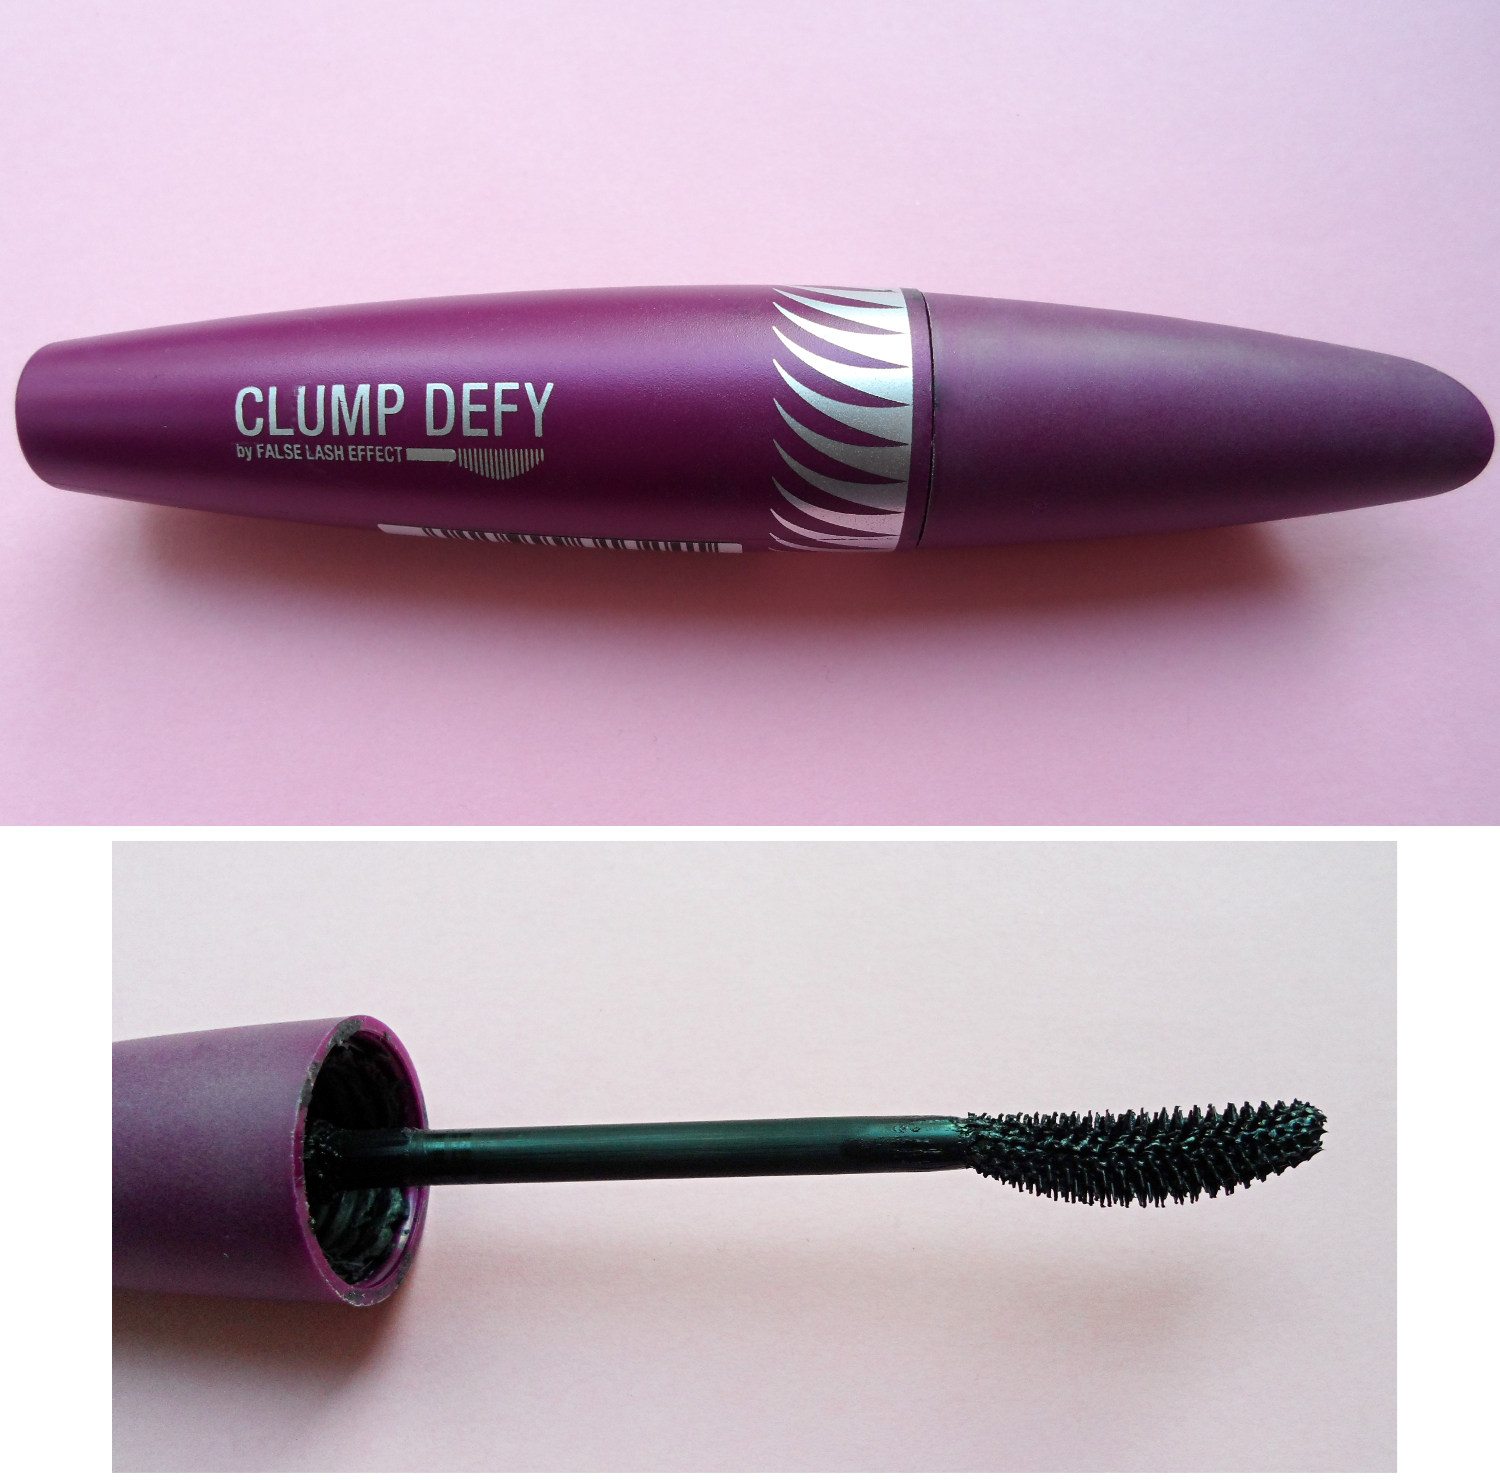 tro på oxiderer at ringe A Clump Defy Mascara by Max Factor for Perfect Lash Separation | Review &  Demo | January Girl